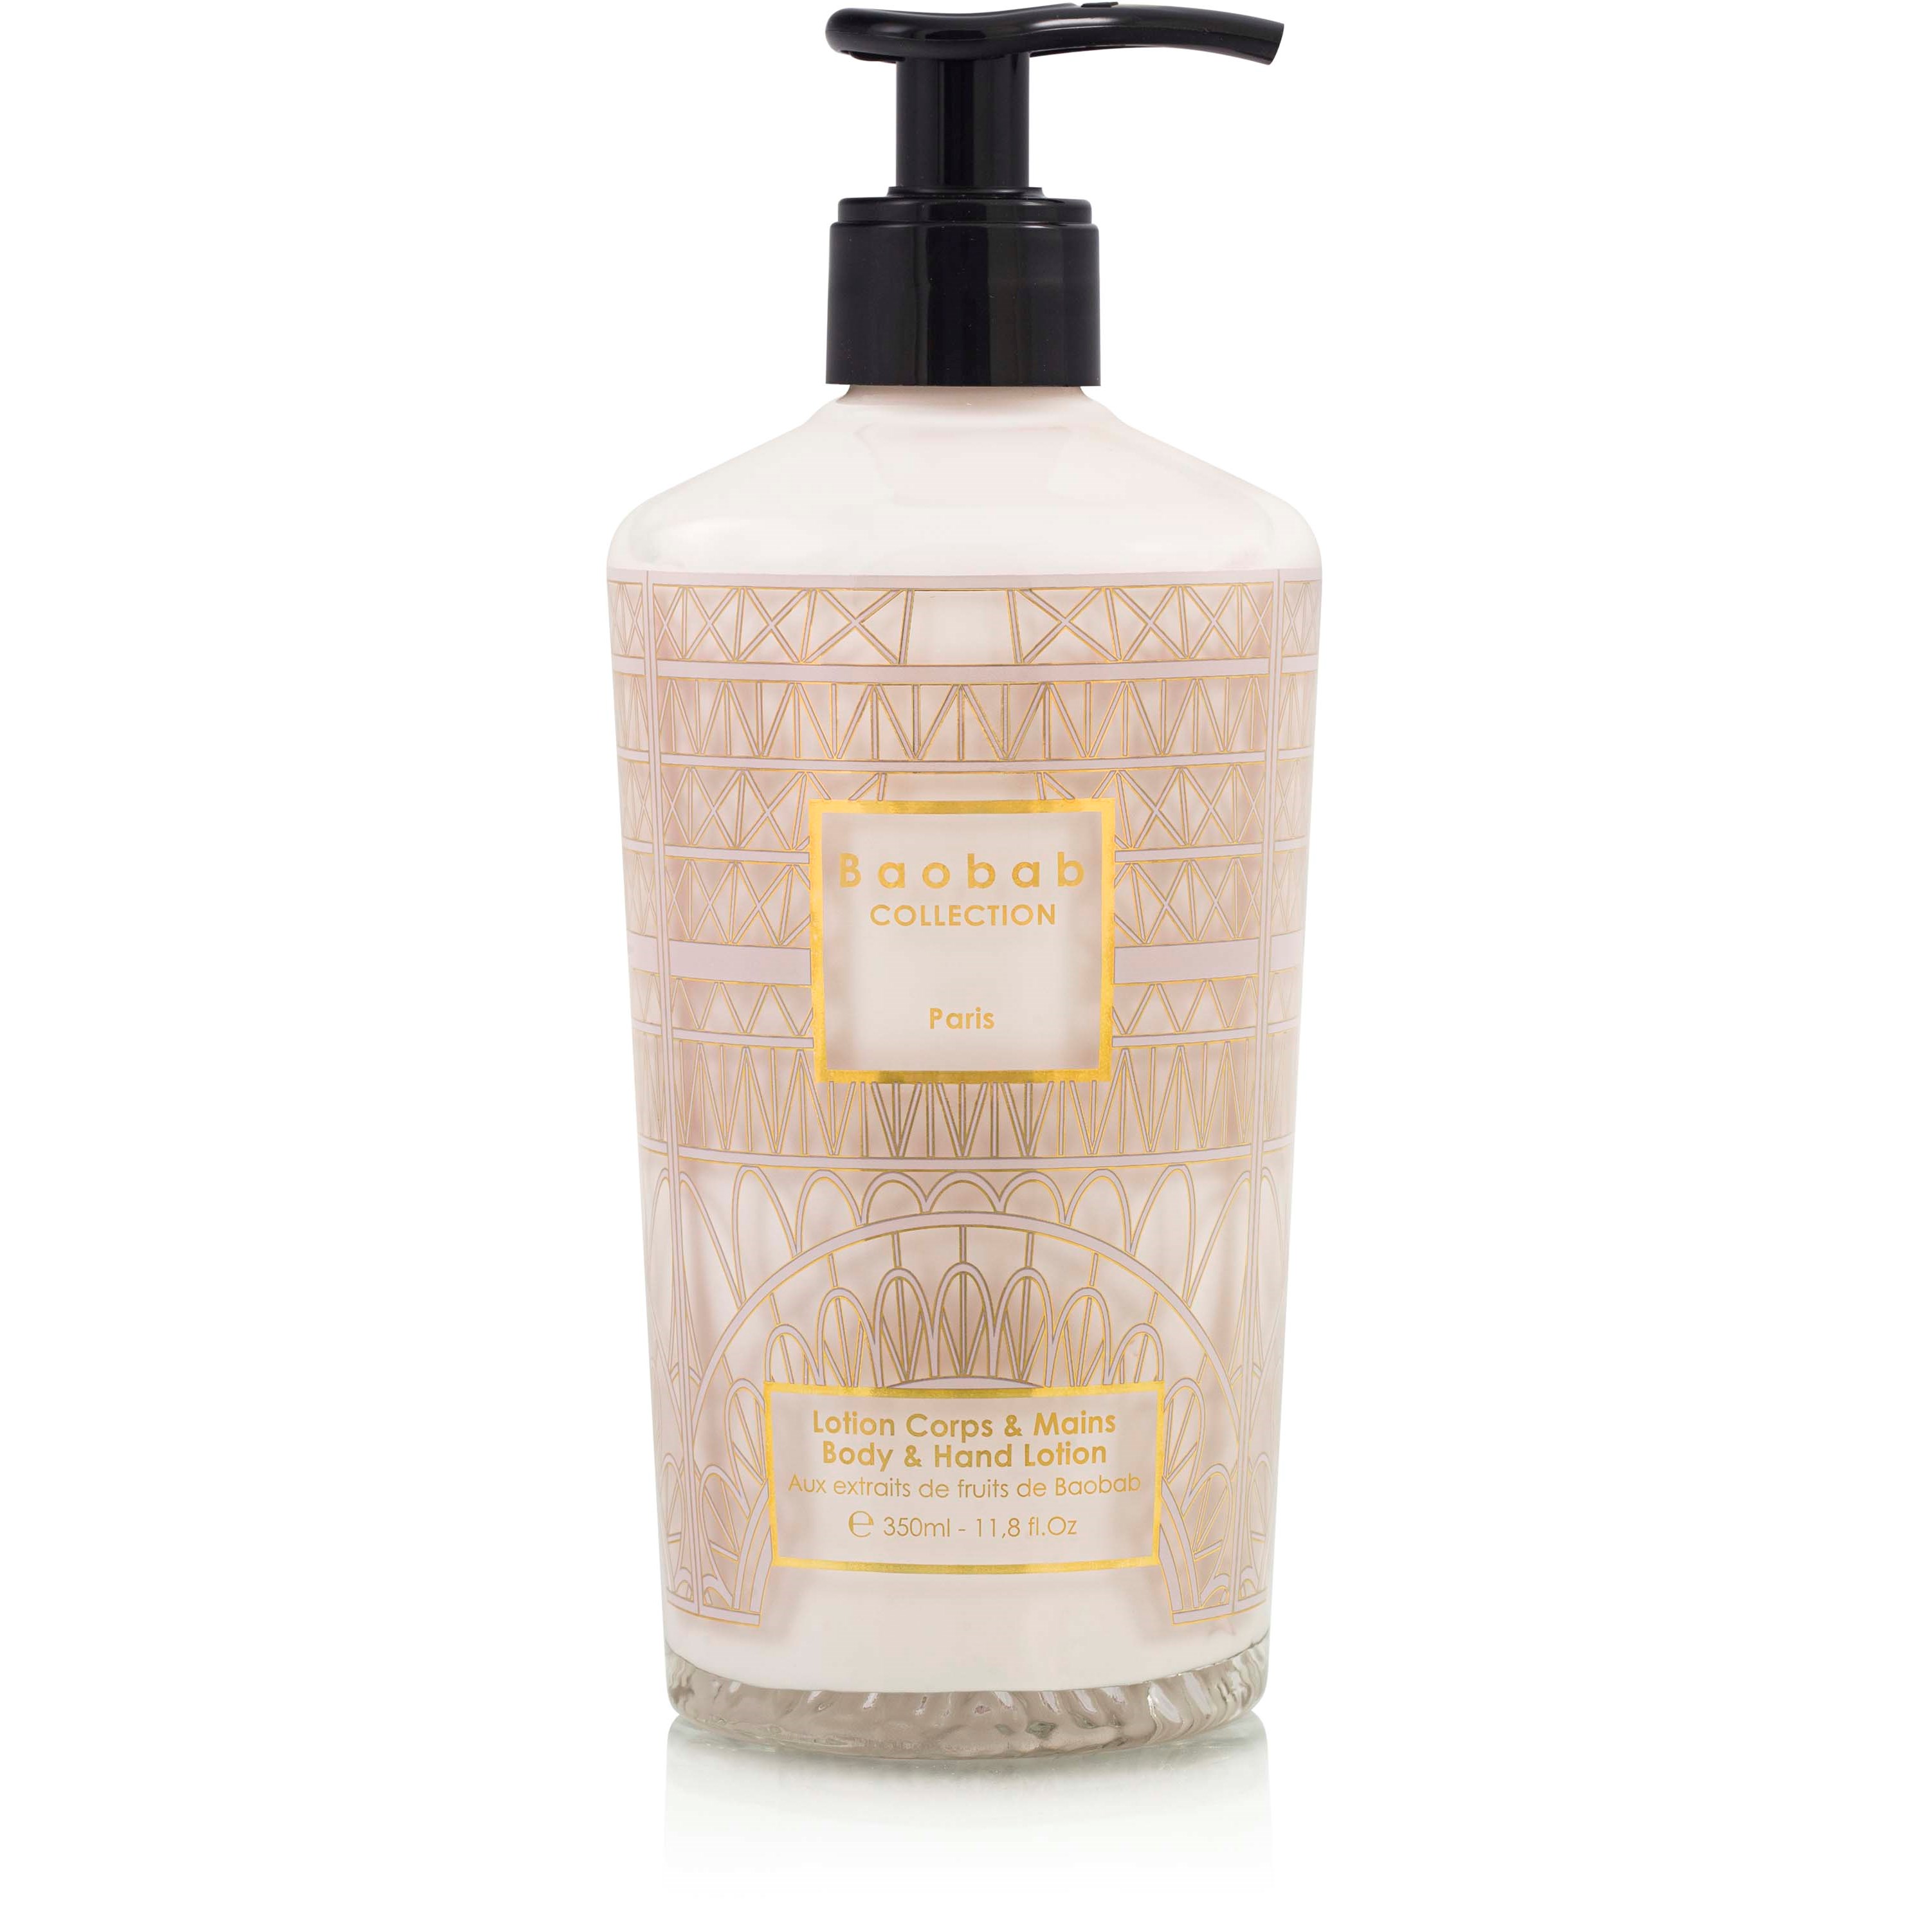 Baobab Collection Paris Body & Hand Lotion 350 ml